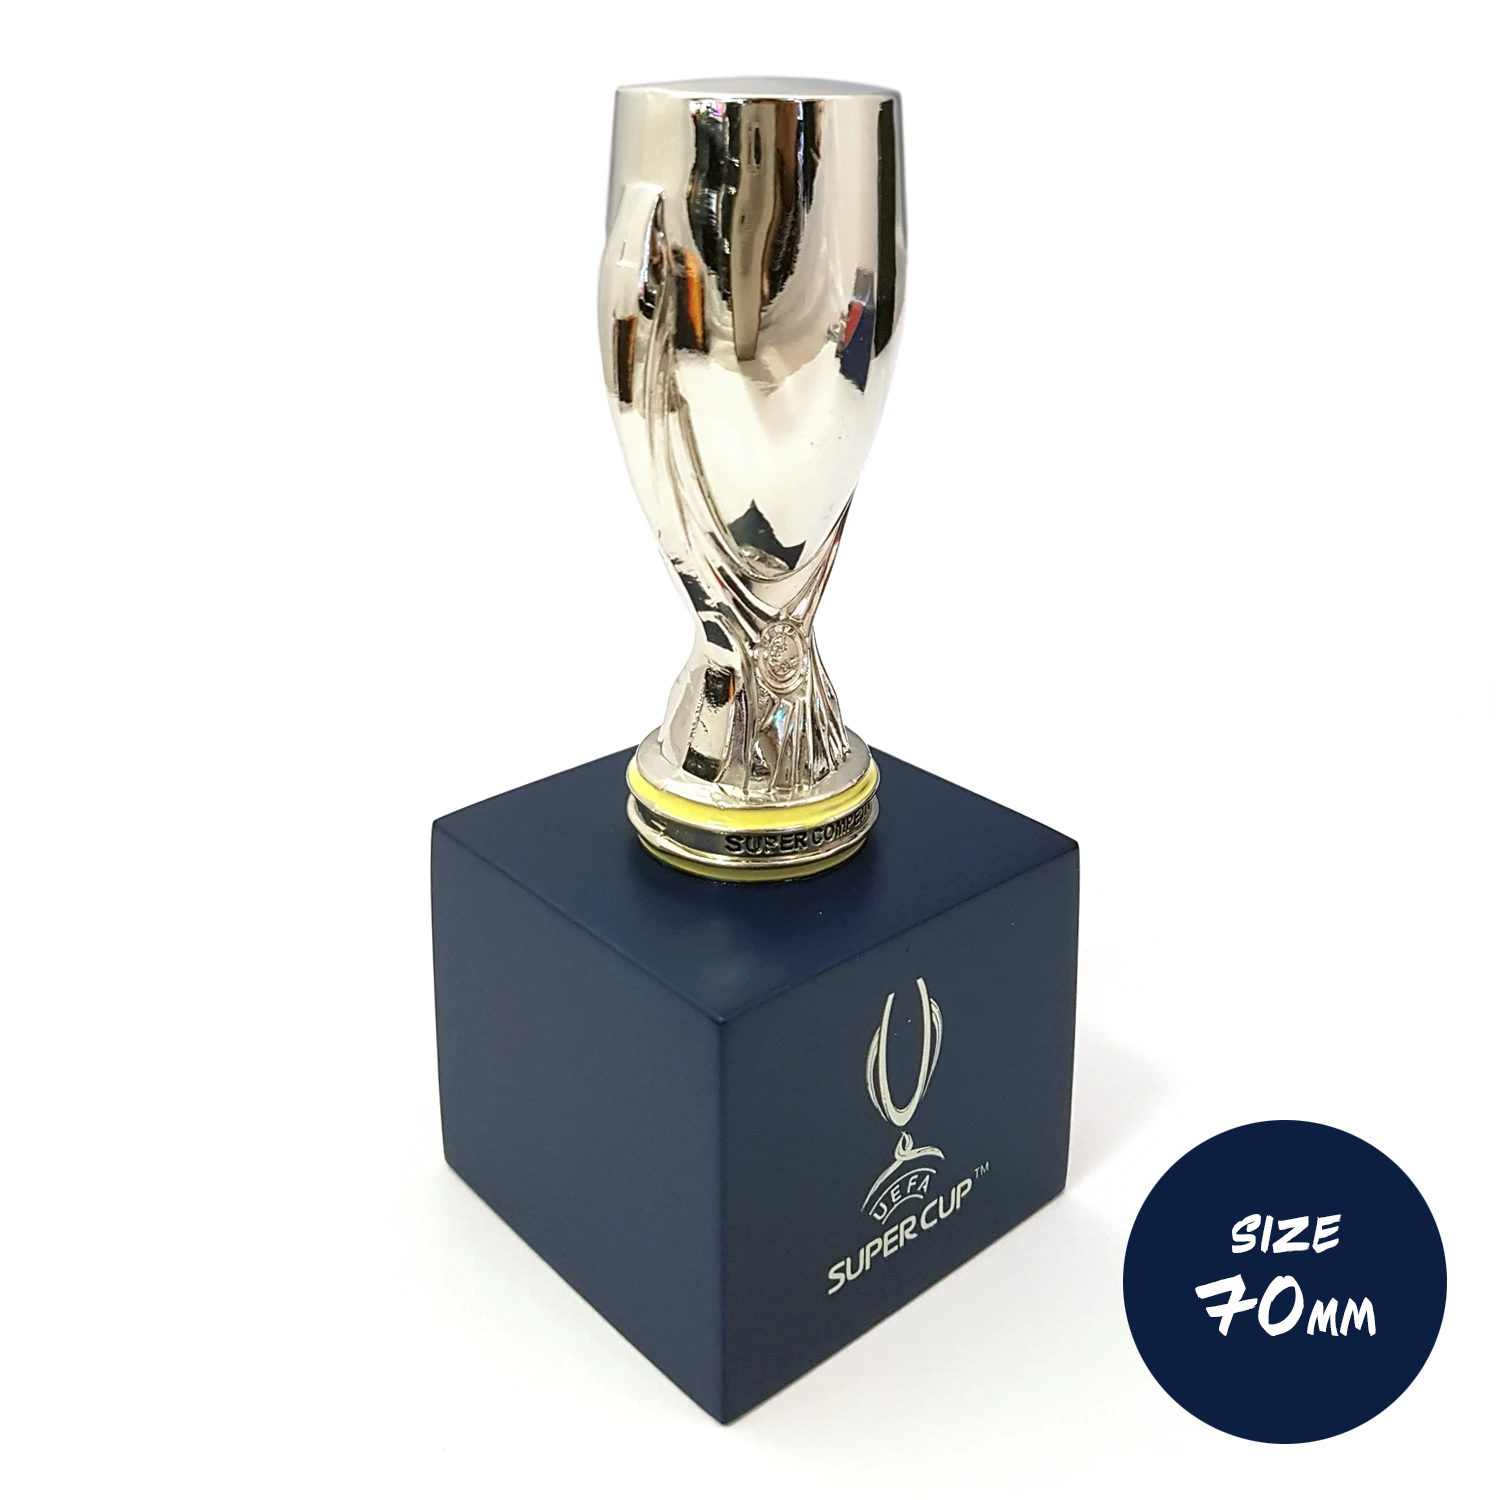 Super Cup, Soccer Trophy, Super Competition Trophy, Football Trophy for  Souvenir/Fans/Gift/Collection/Ornaments/Awards for Football Matches 46cm  Height (Size : 46cm/18) : : Sports & Outdoors